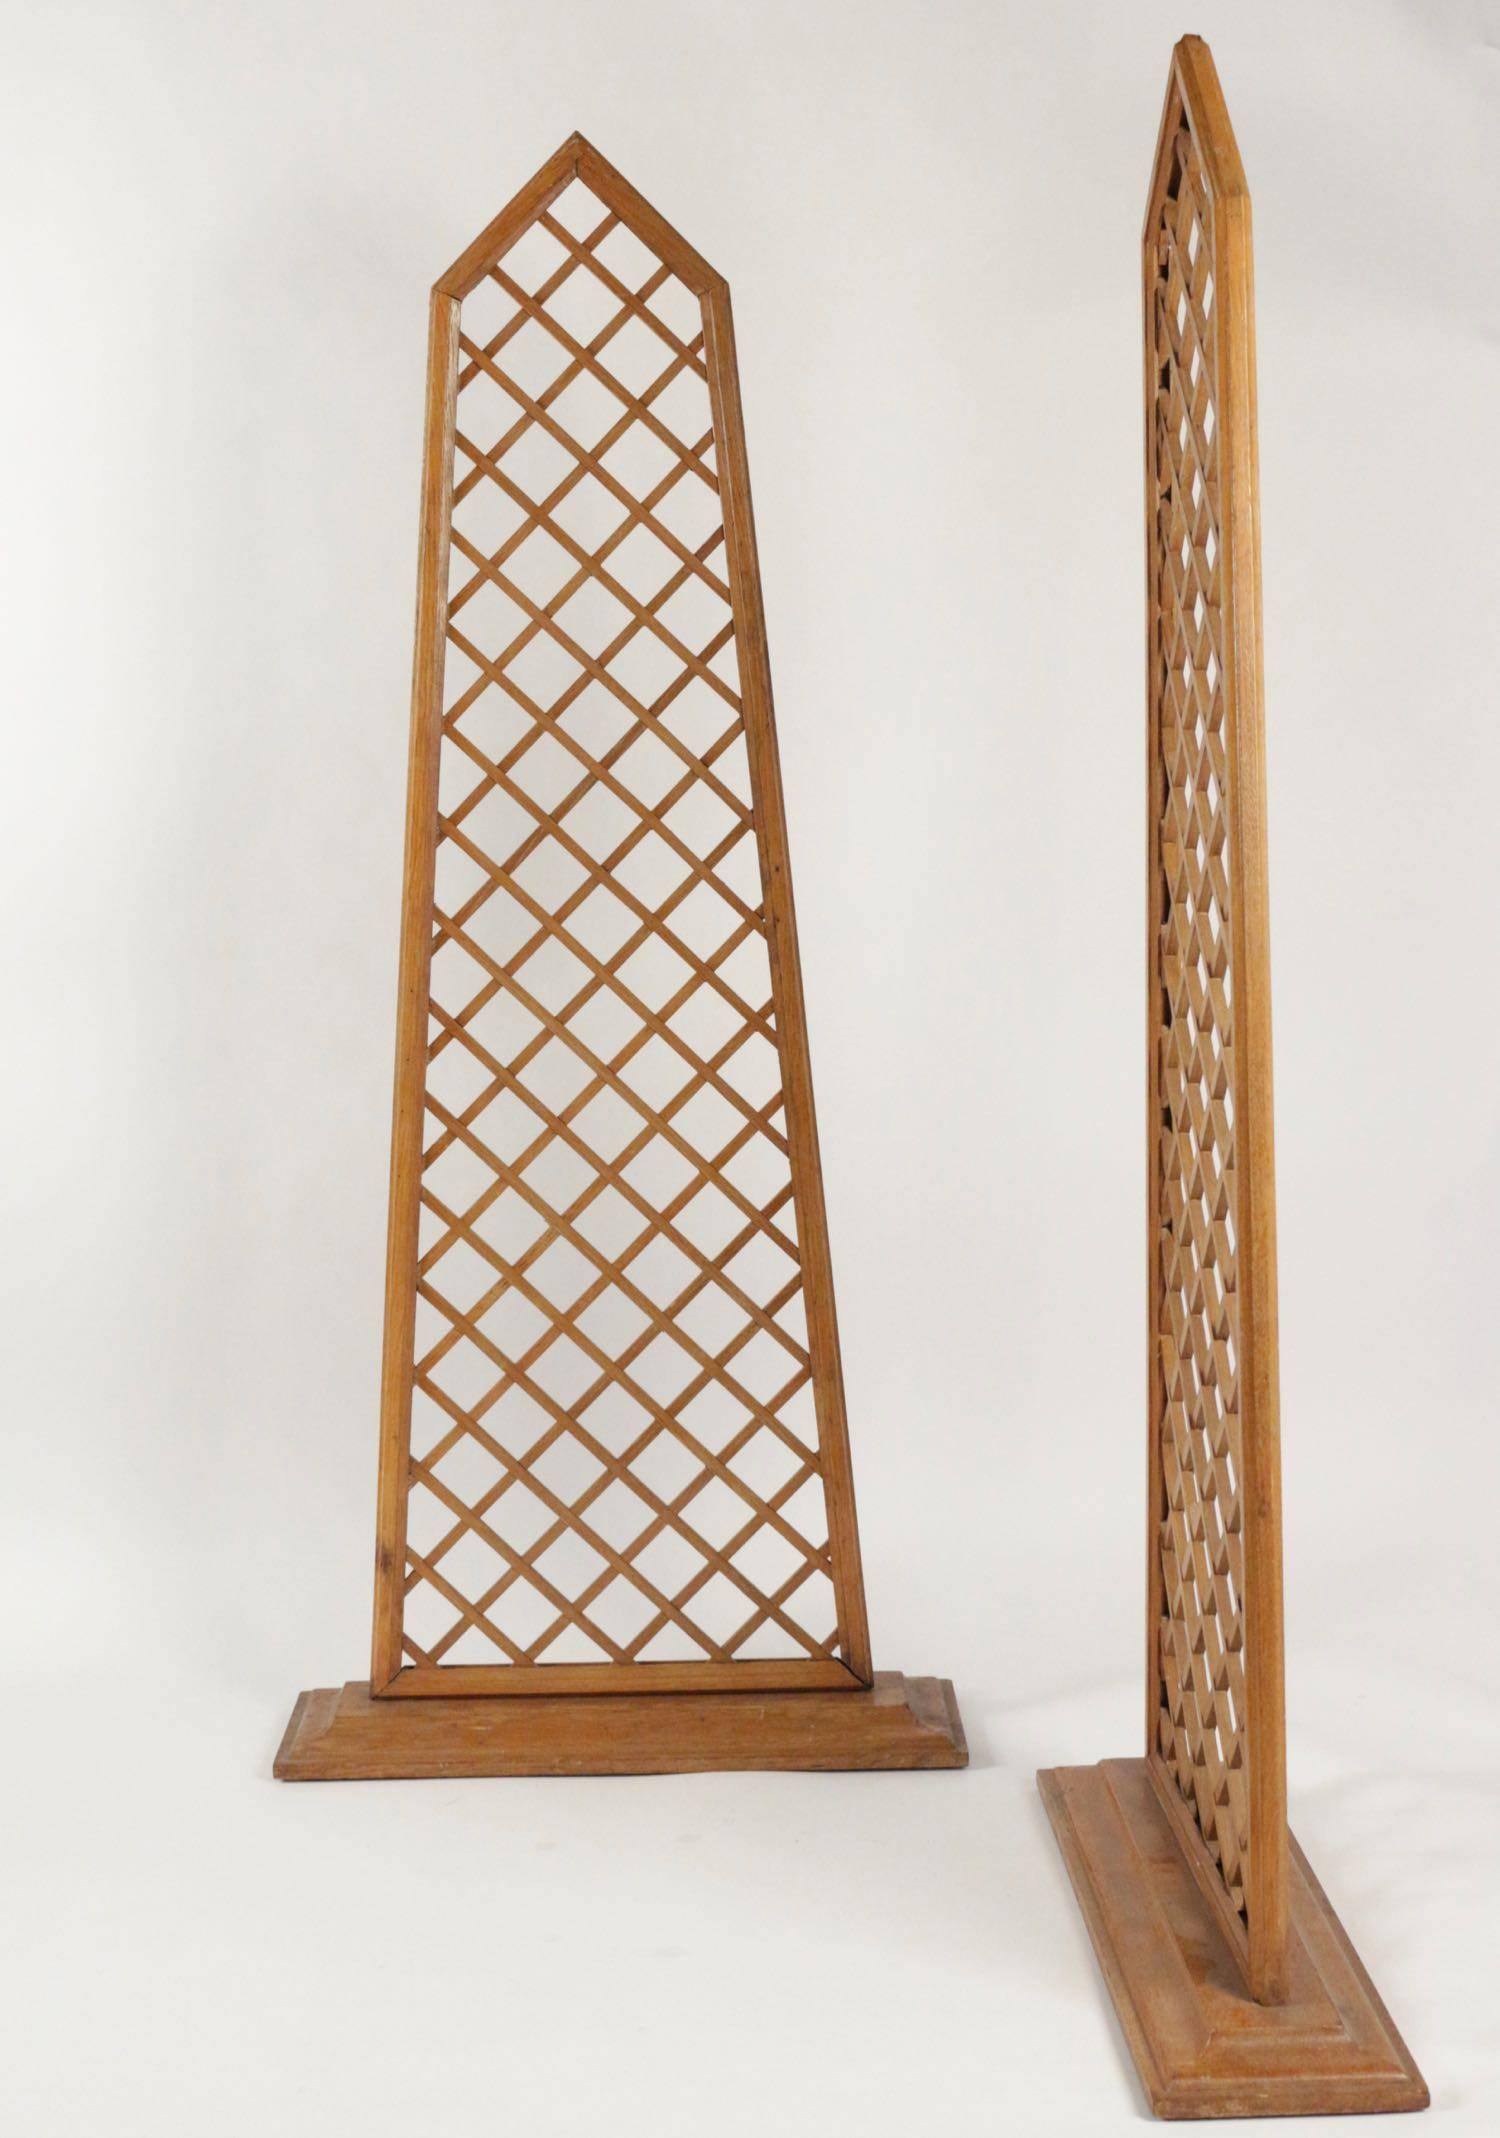 Pair of wall screens in wood, circa 1970-1980 from Maison Siegel. Measures: Height 110 x wide 47 x 14m deep.
 